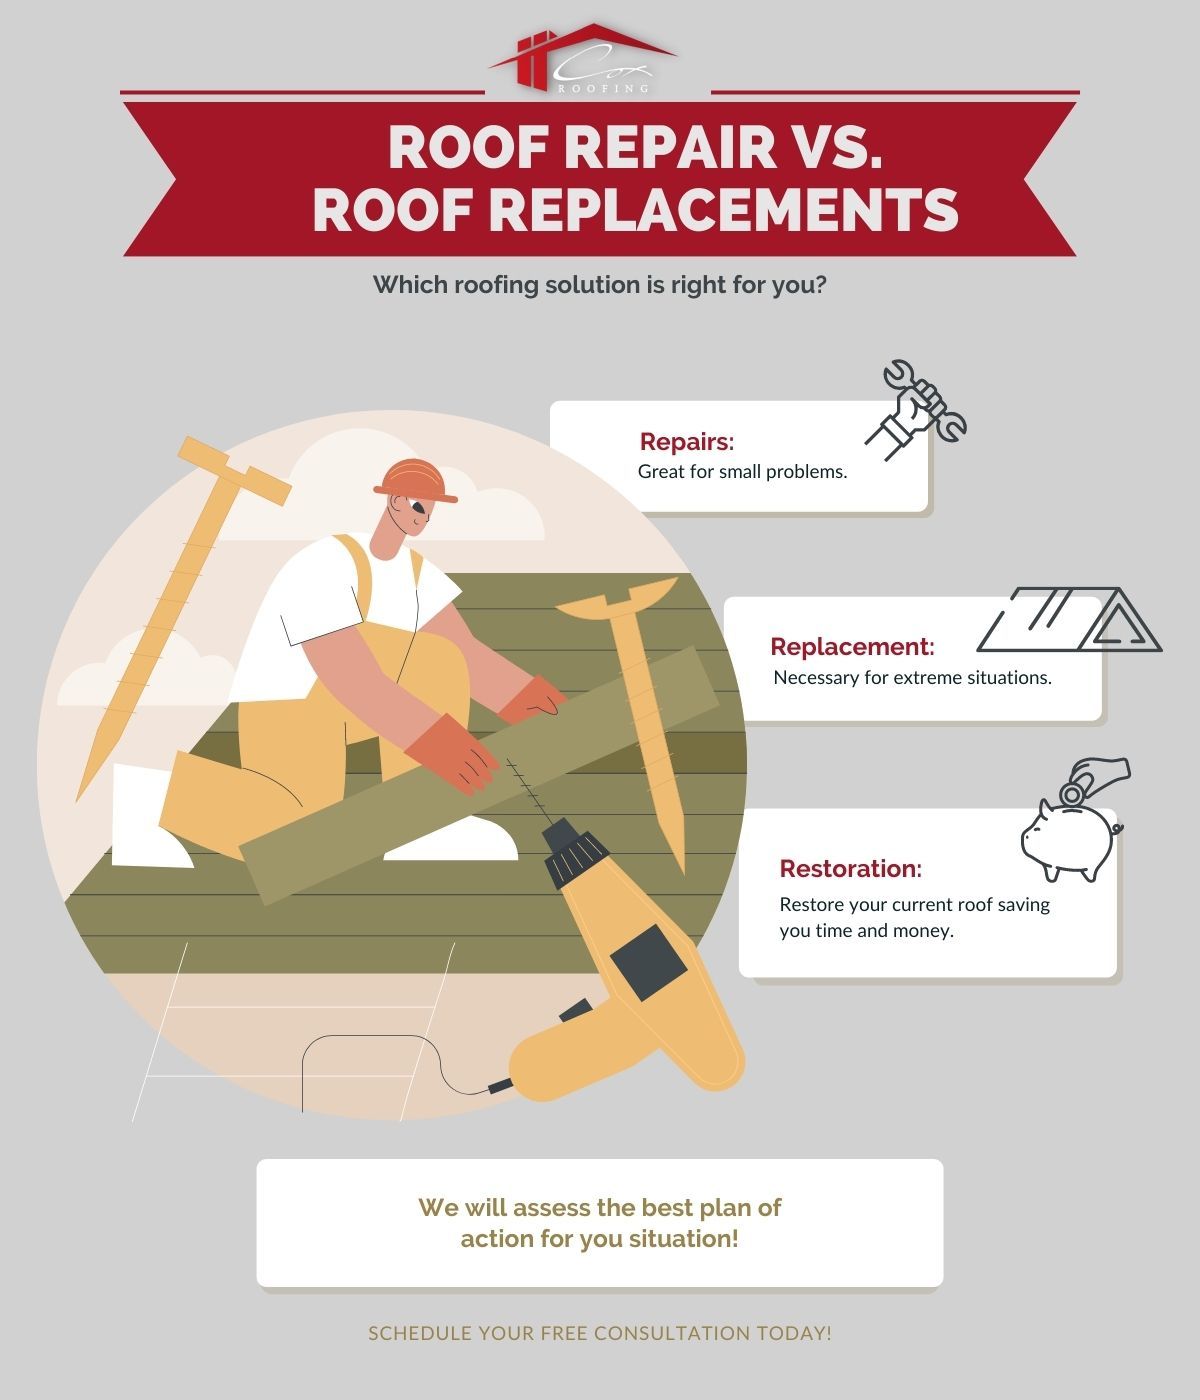 M24639 - Infographic - Roof Repair Vs Roof Replacements (1).jpg